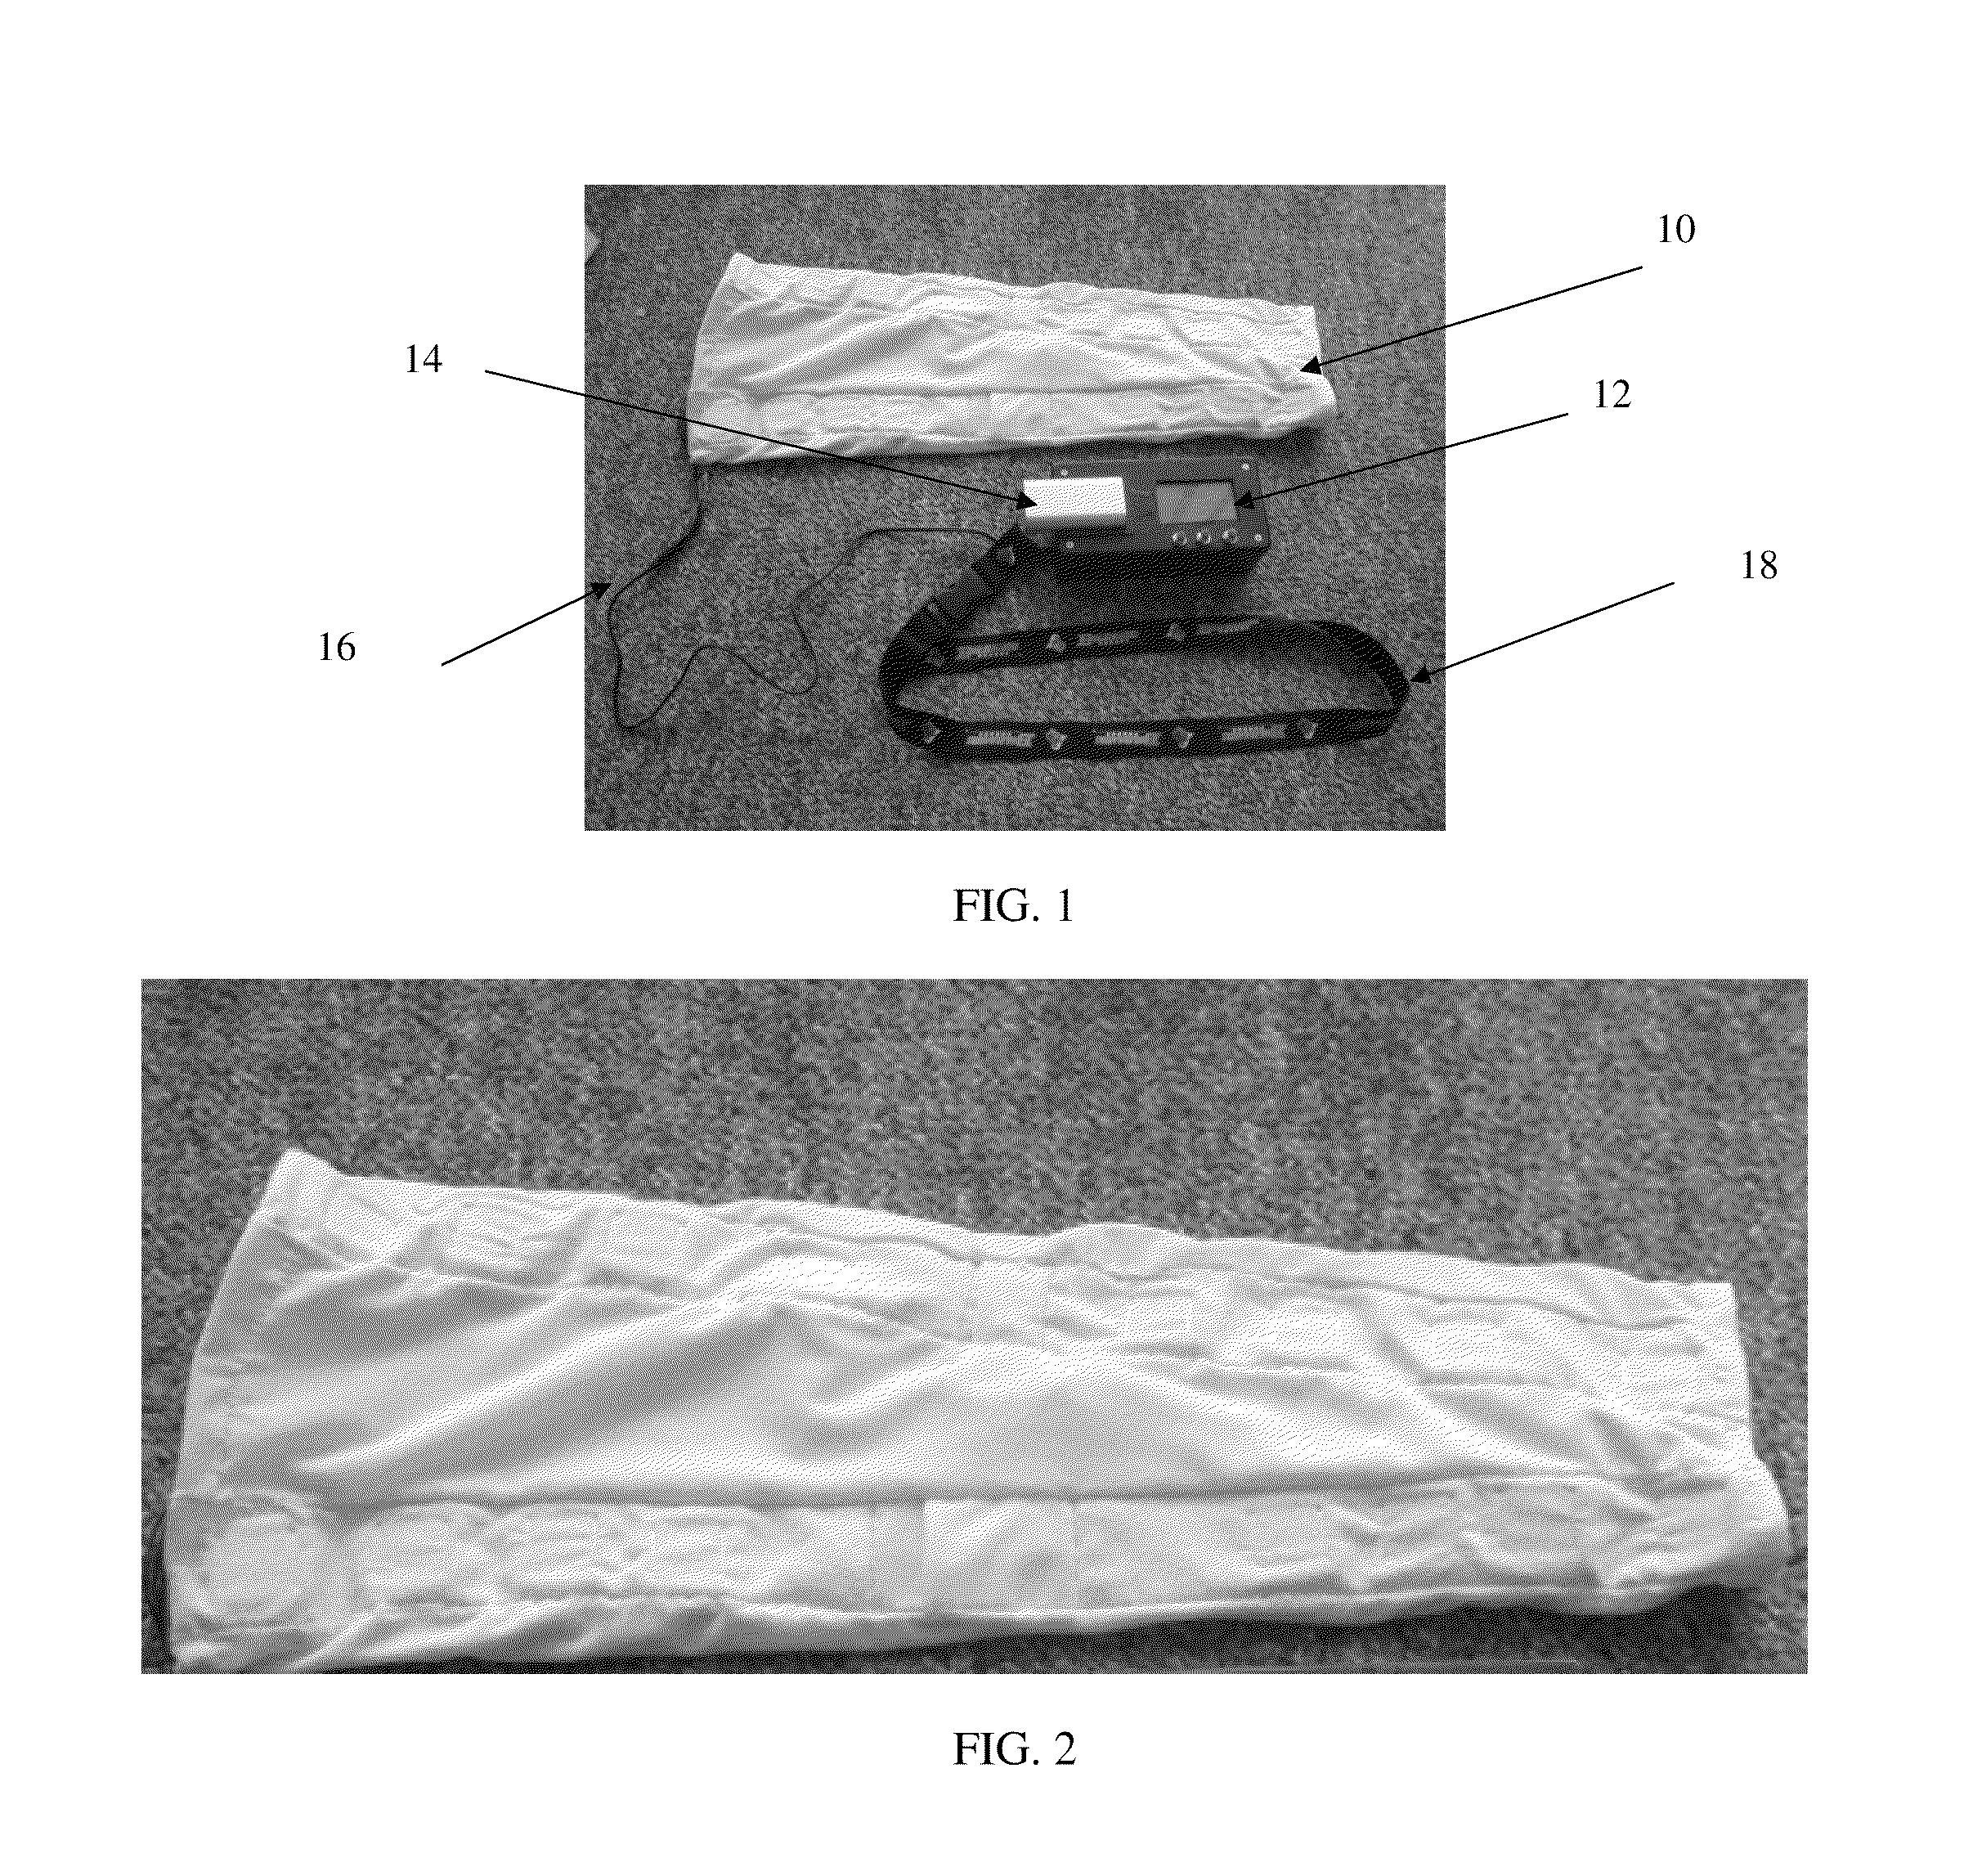 Therapeutic method and apparatus using mechanically induced vibration